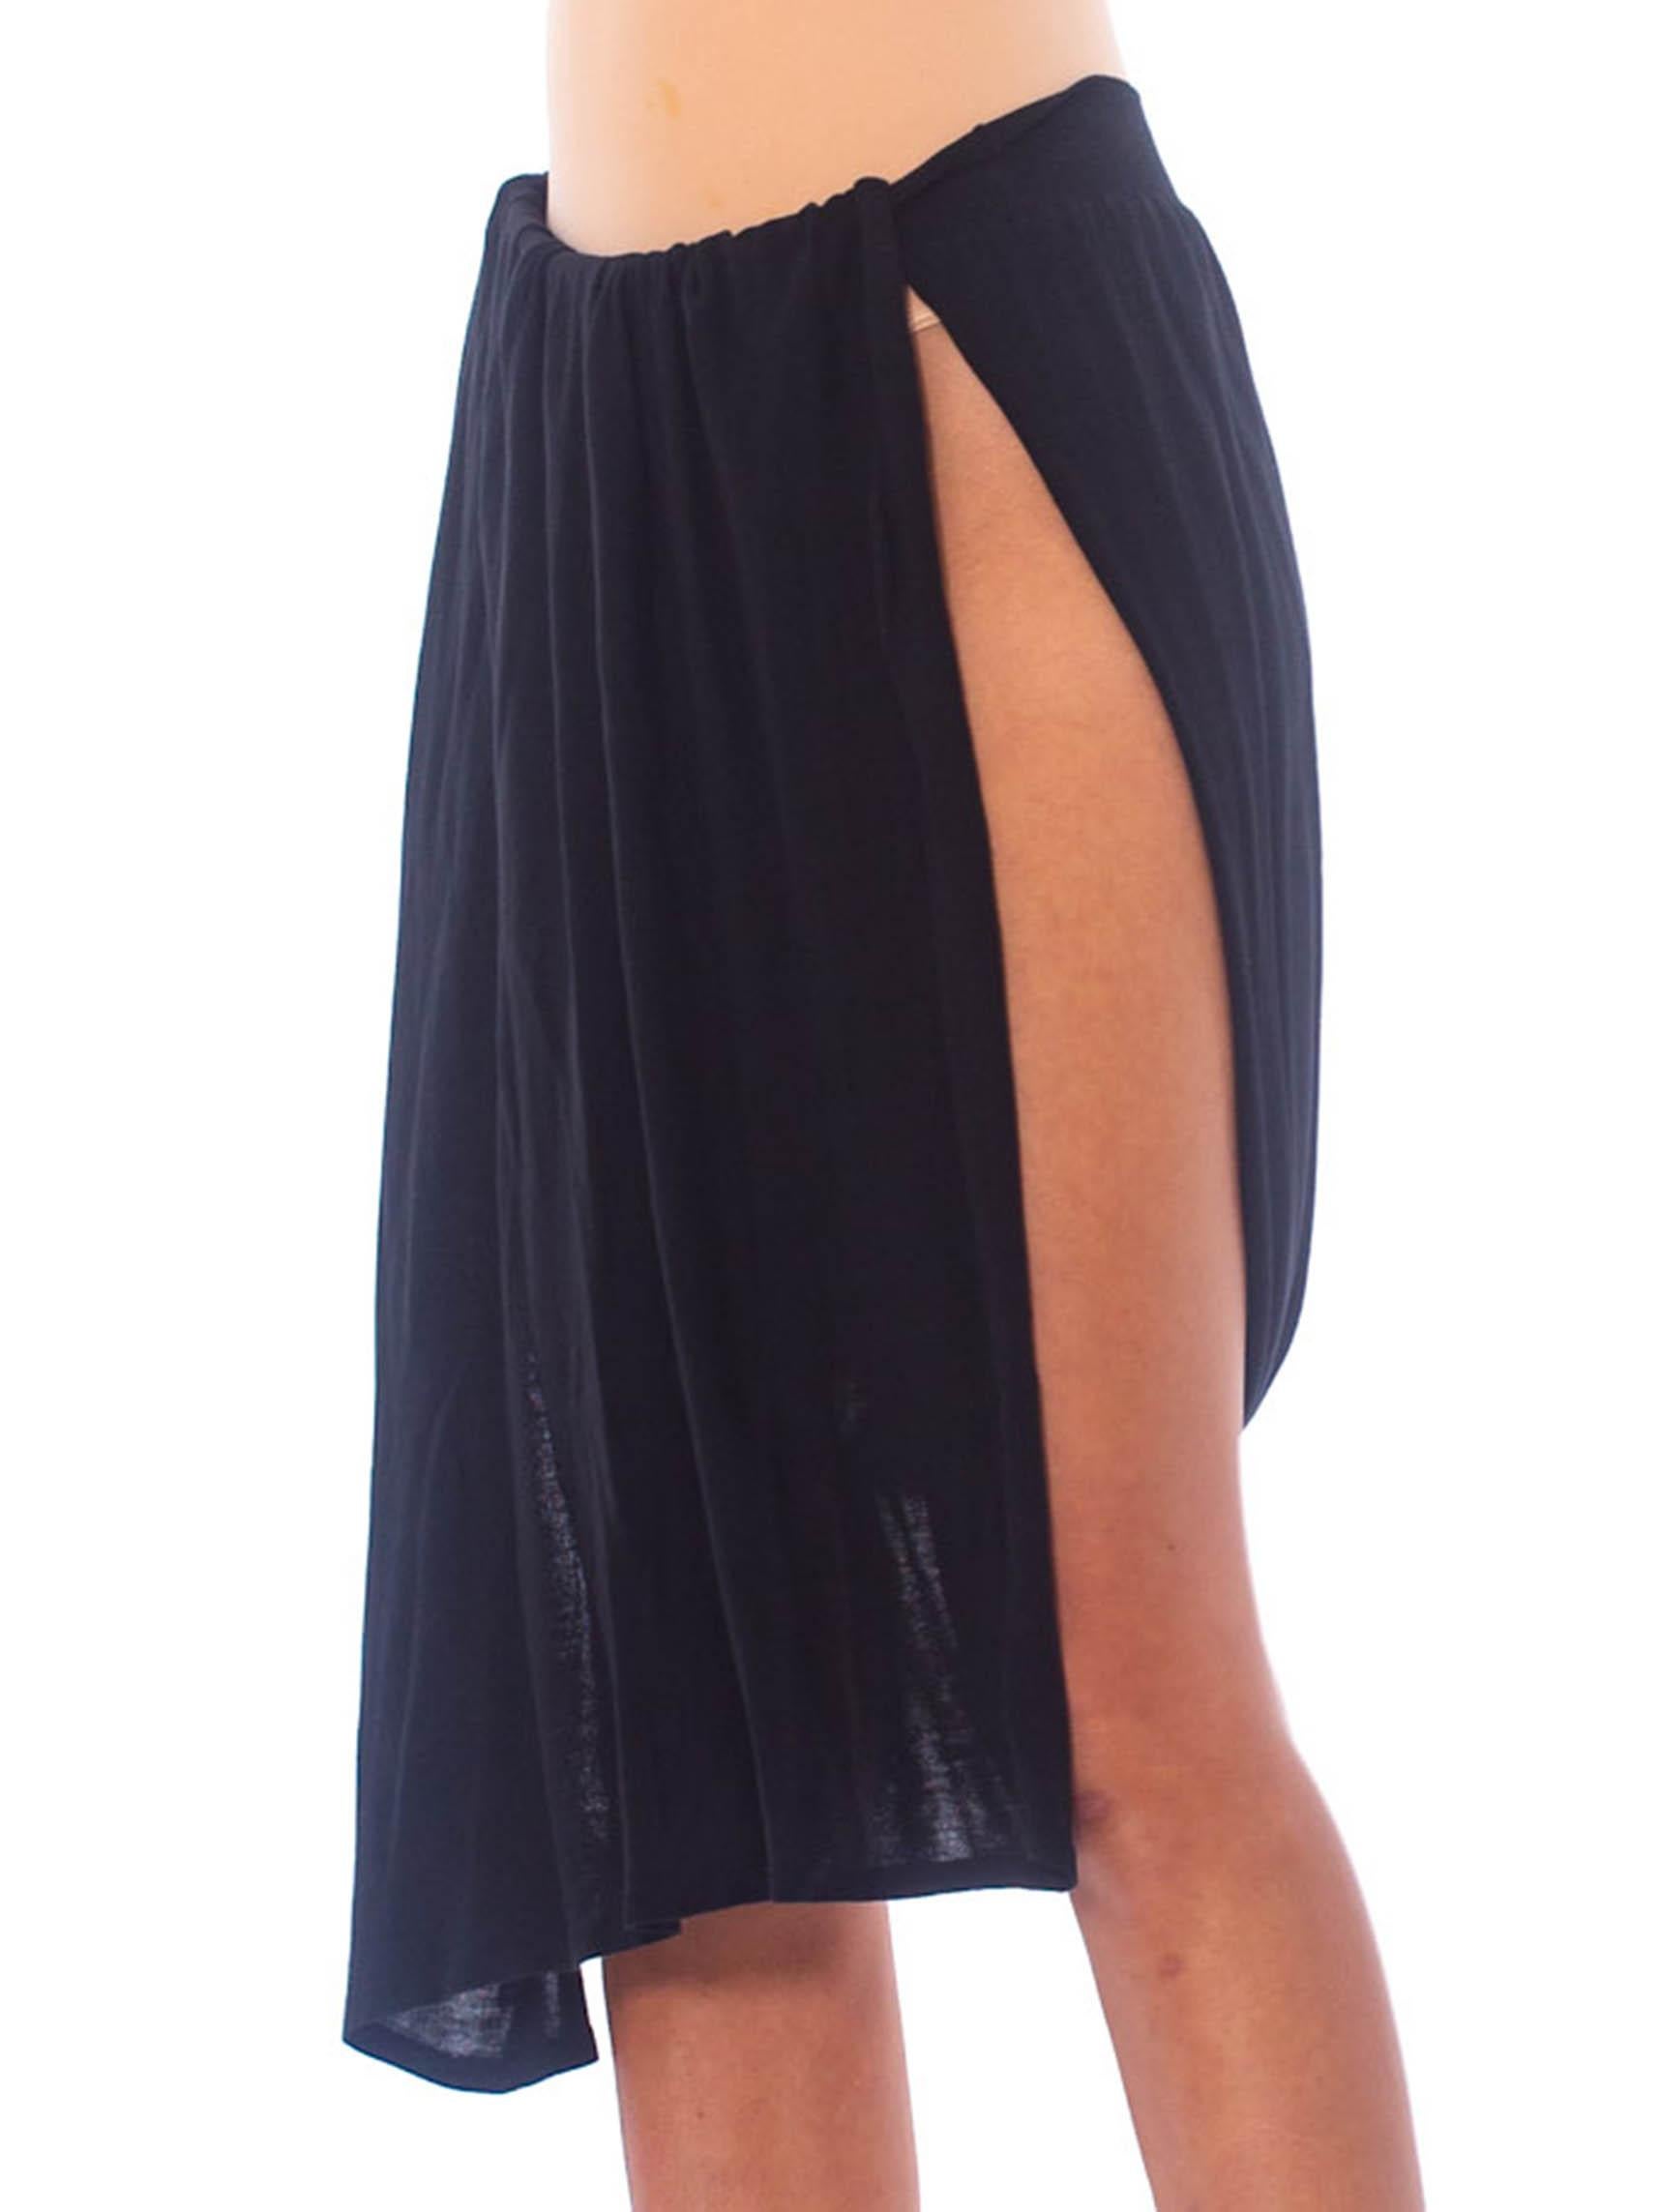 1990S JEAN PAUL GAULTIER Black Cotton Knit Sarong Skirt For Sale 1